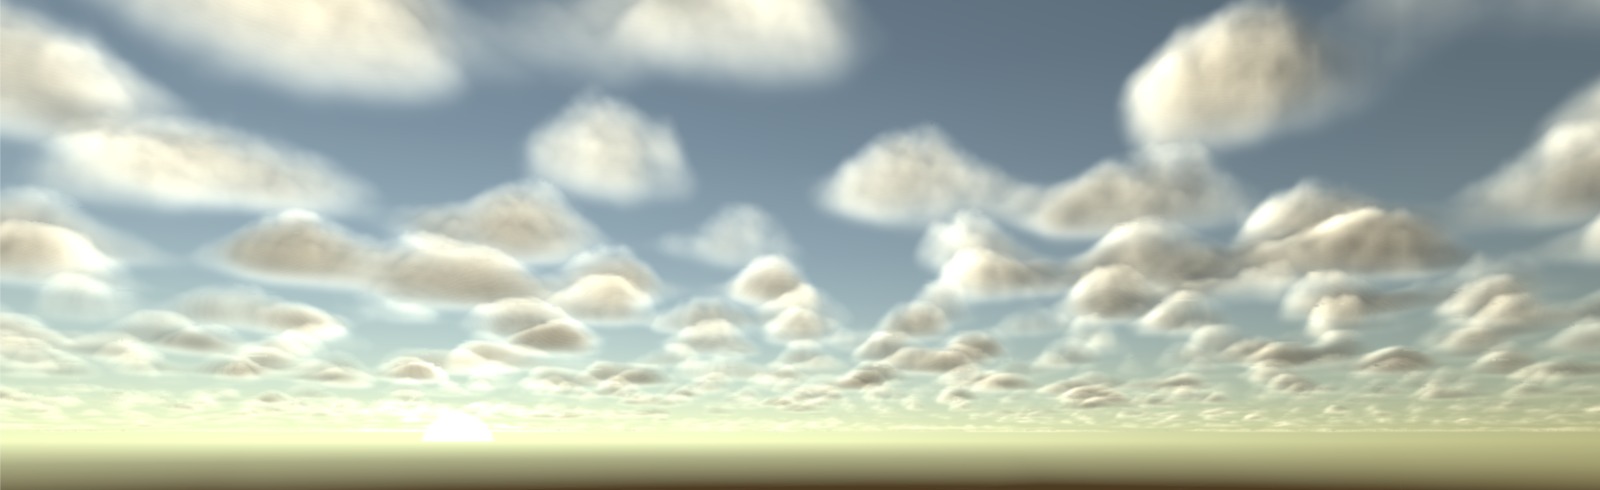 Picture of Physical Cloud Generation Simulation